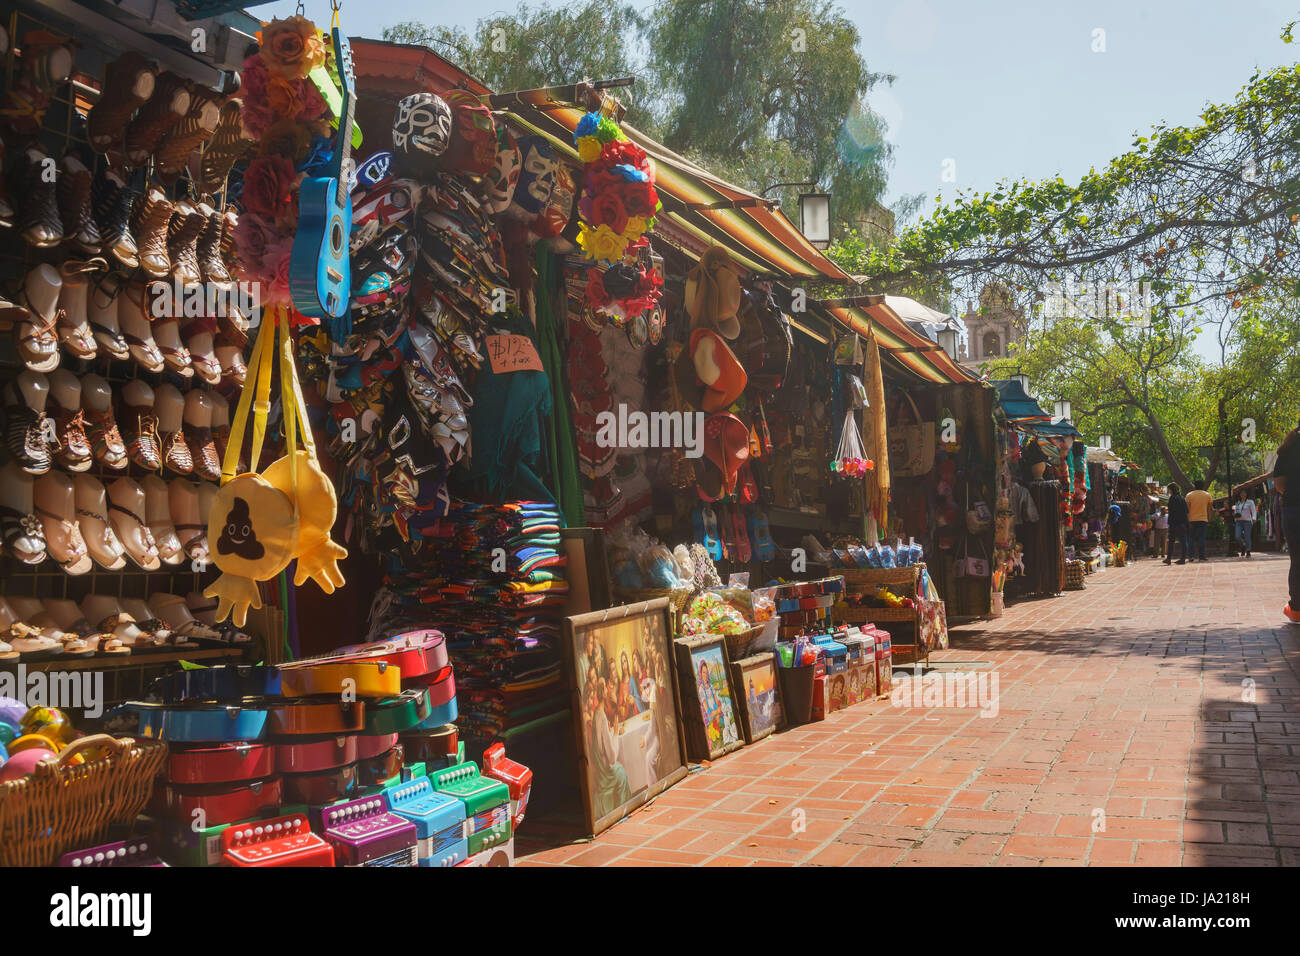 Los Angeles, APR 11: The famous Olvera Street on APR 11, 2017 at Los Angeles Stock Photo